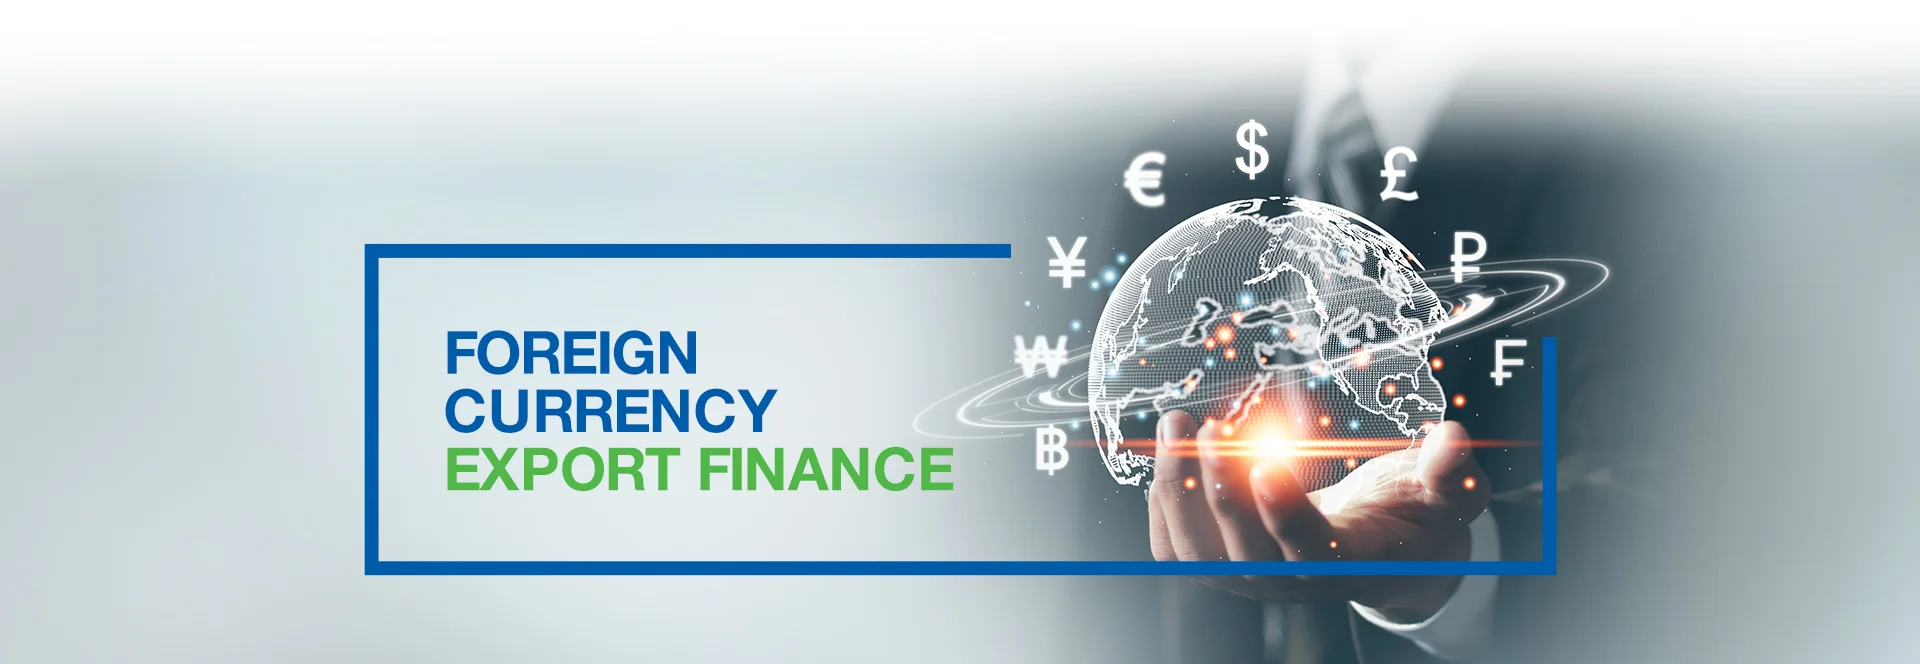 Foreign Currency Export Finance (FCEF)